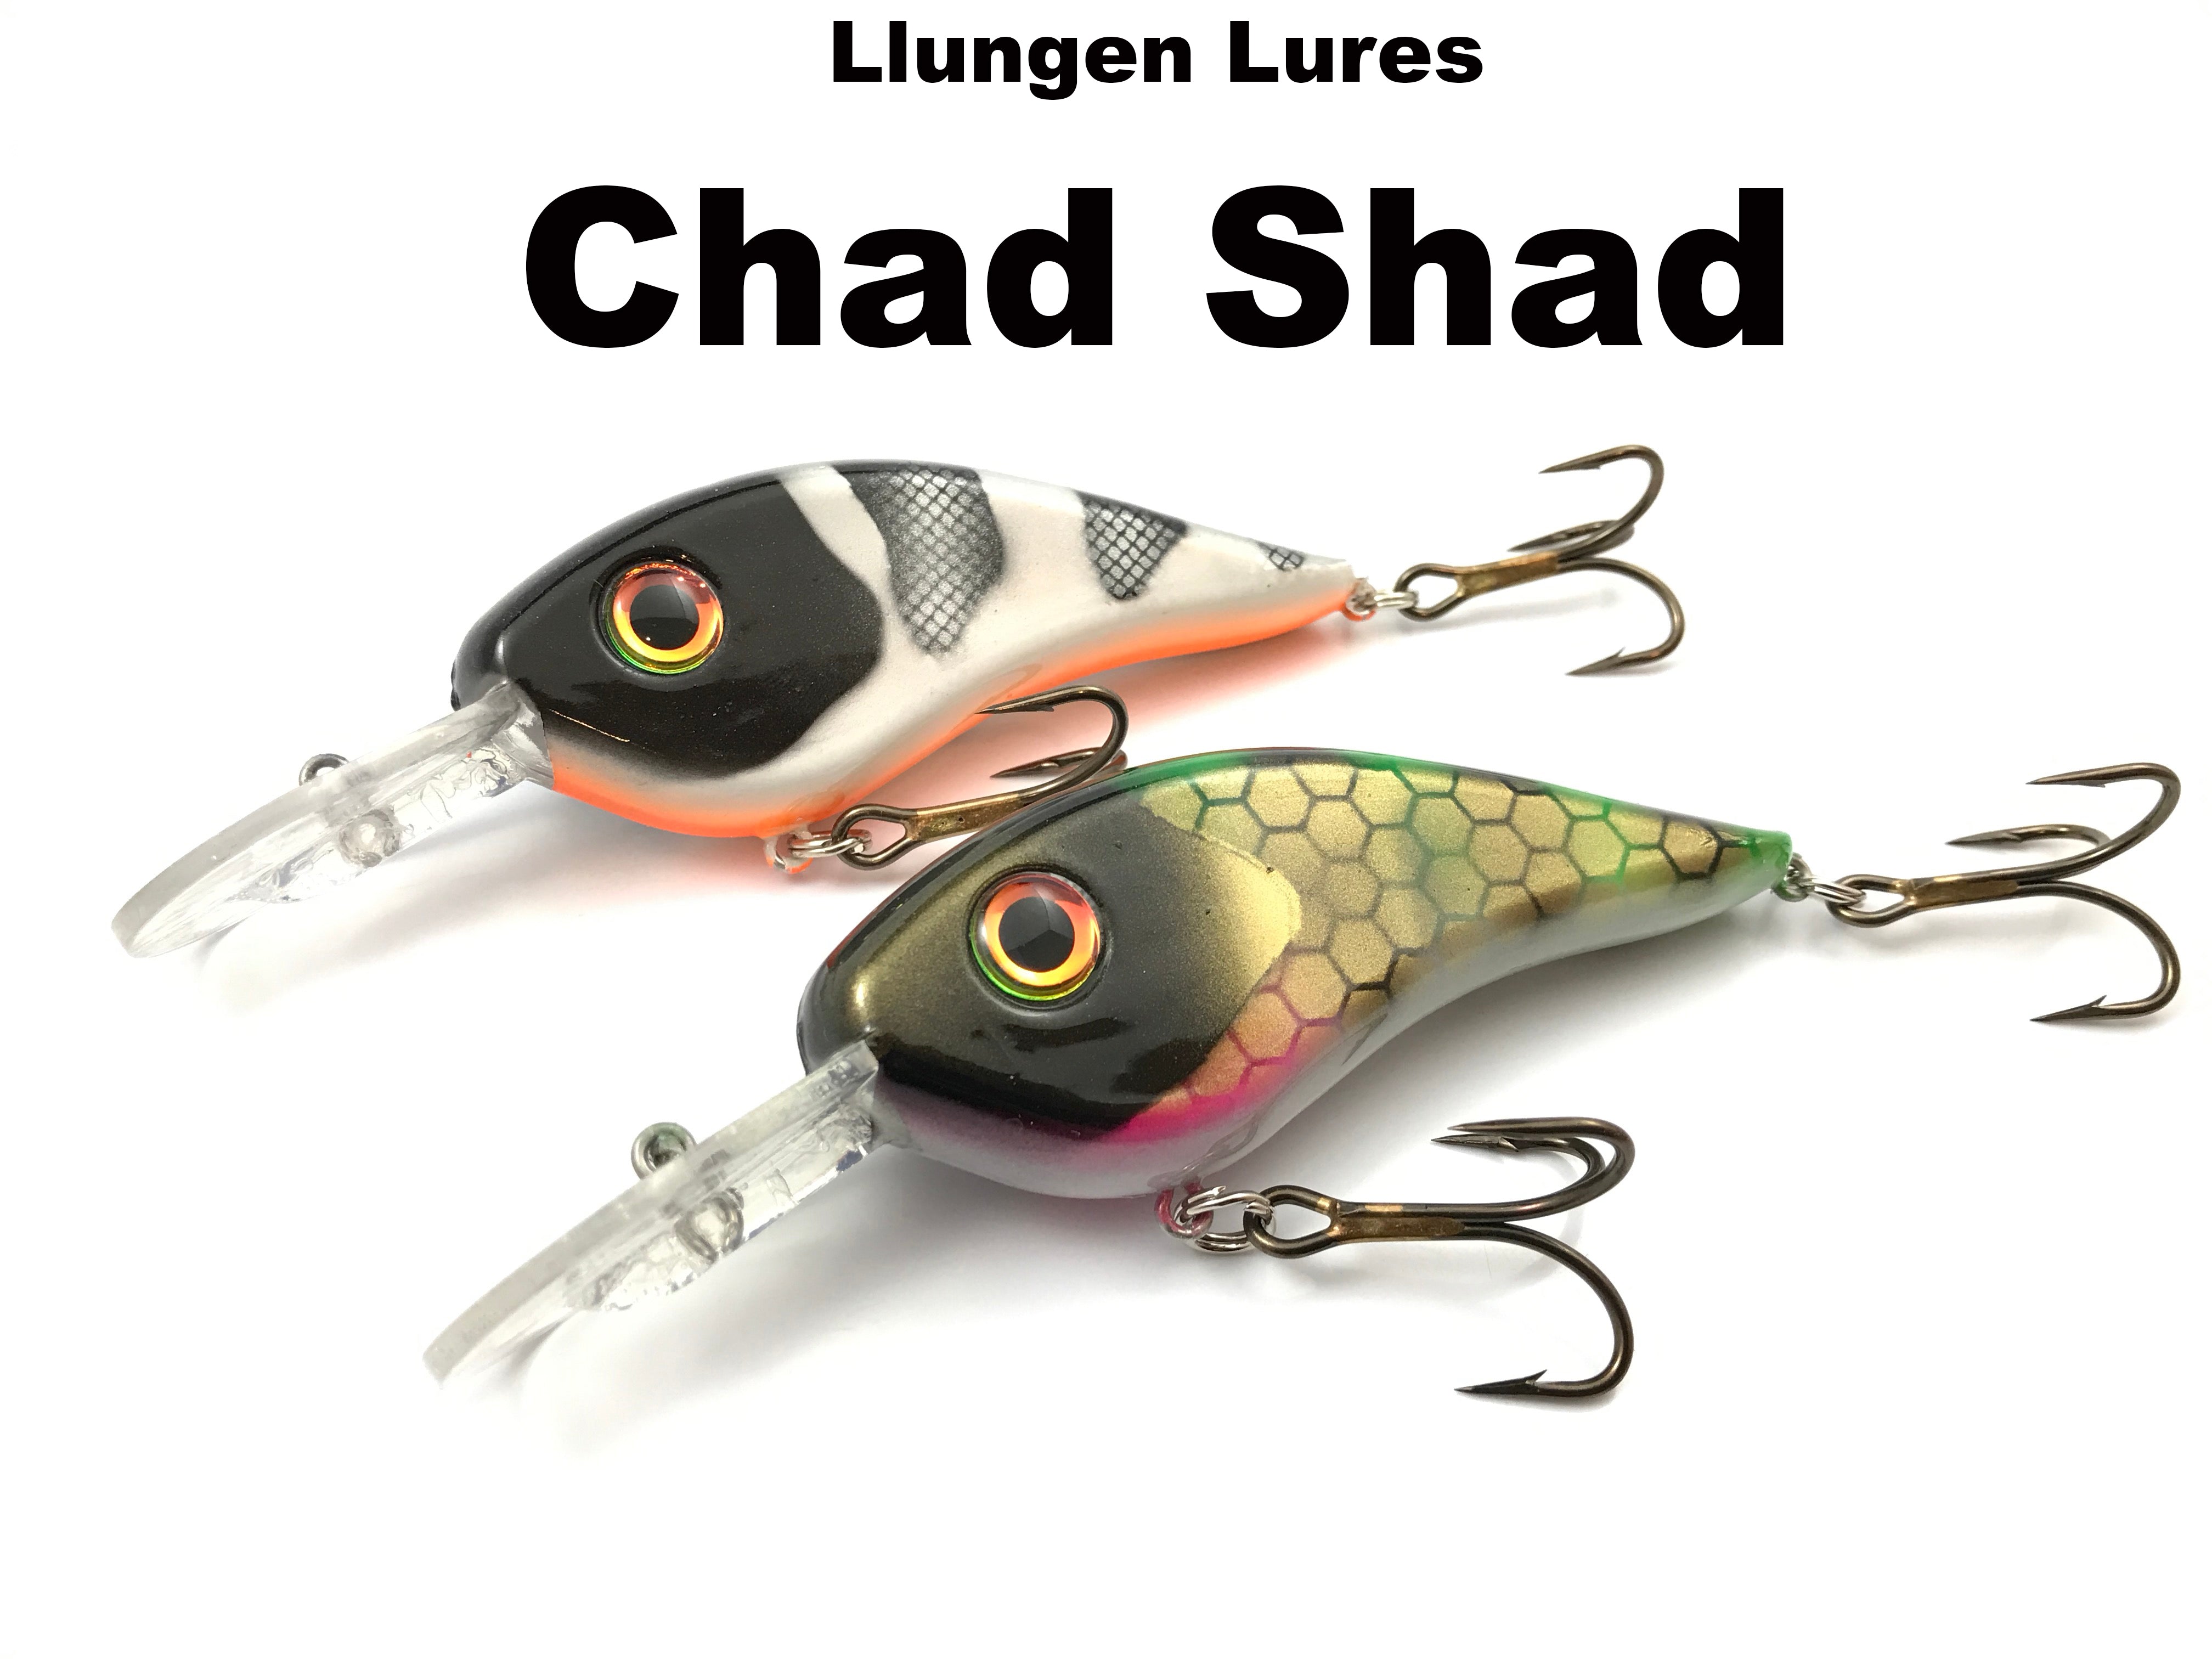 JASONS 2 STINGER SHAD 30 PACK GRUBS CRAPPIE LURES JIGS PISSED